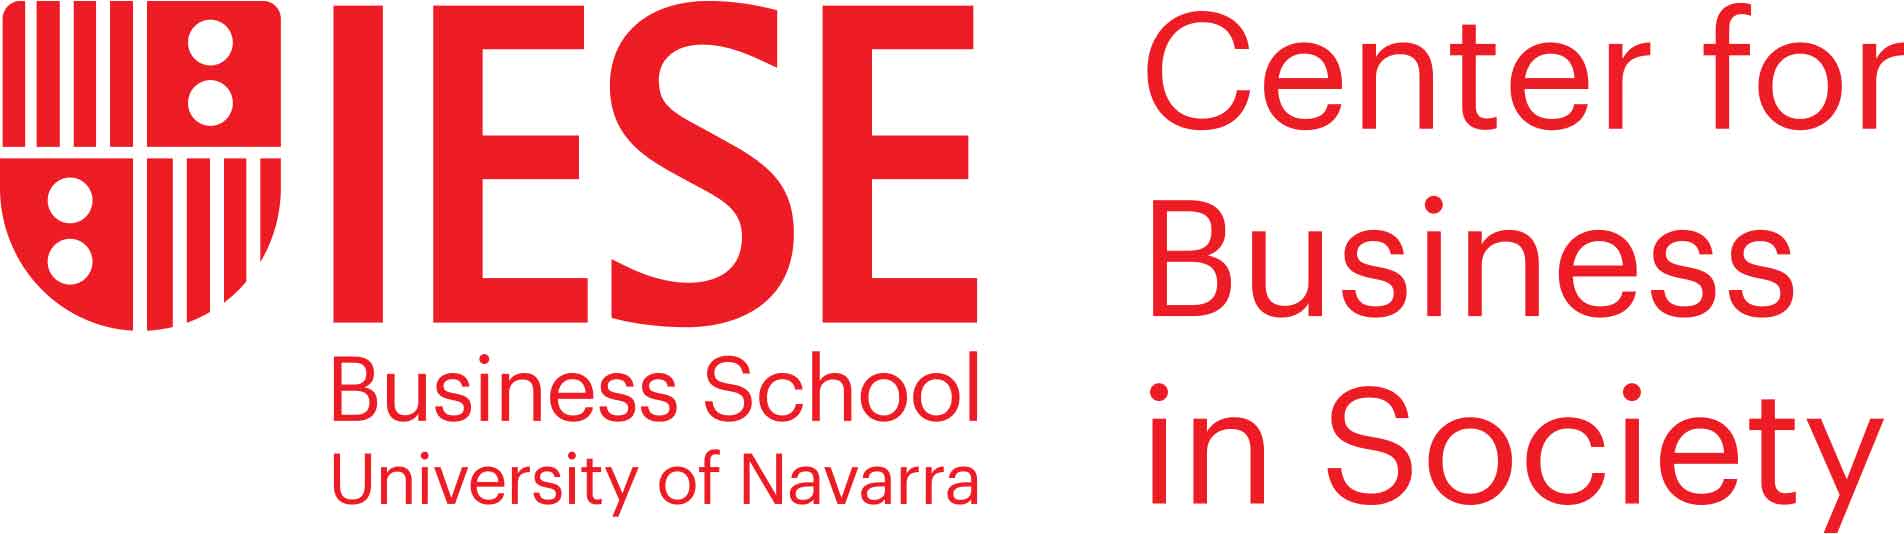 IESE-Center-Business-Society-logo